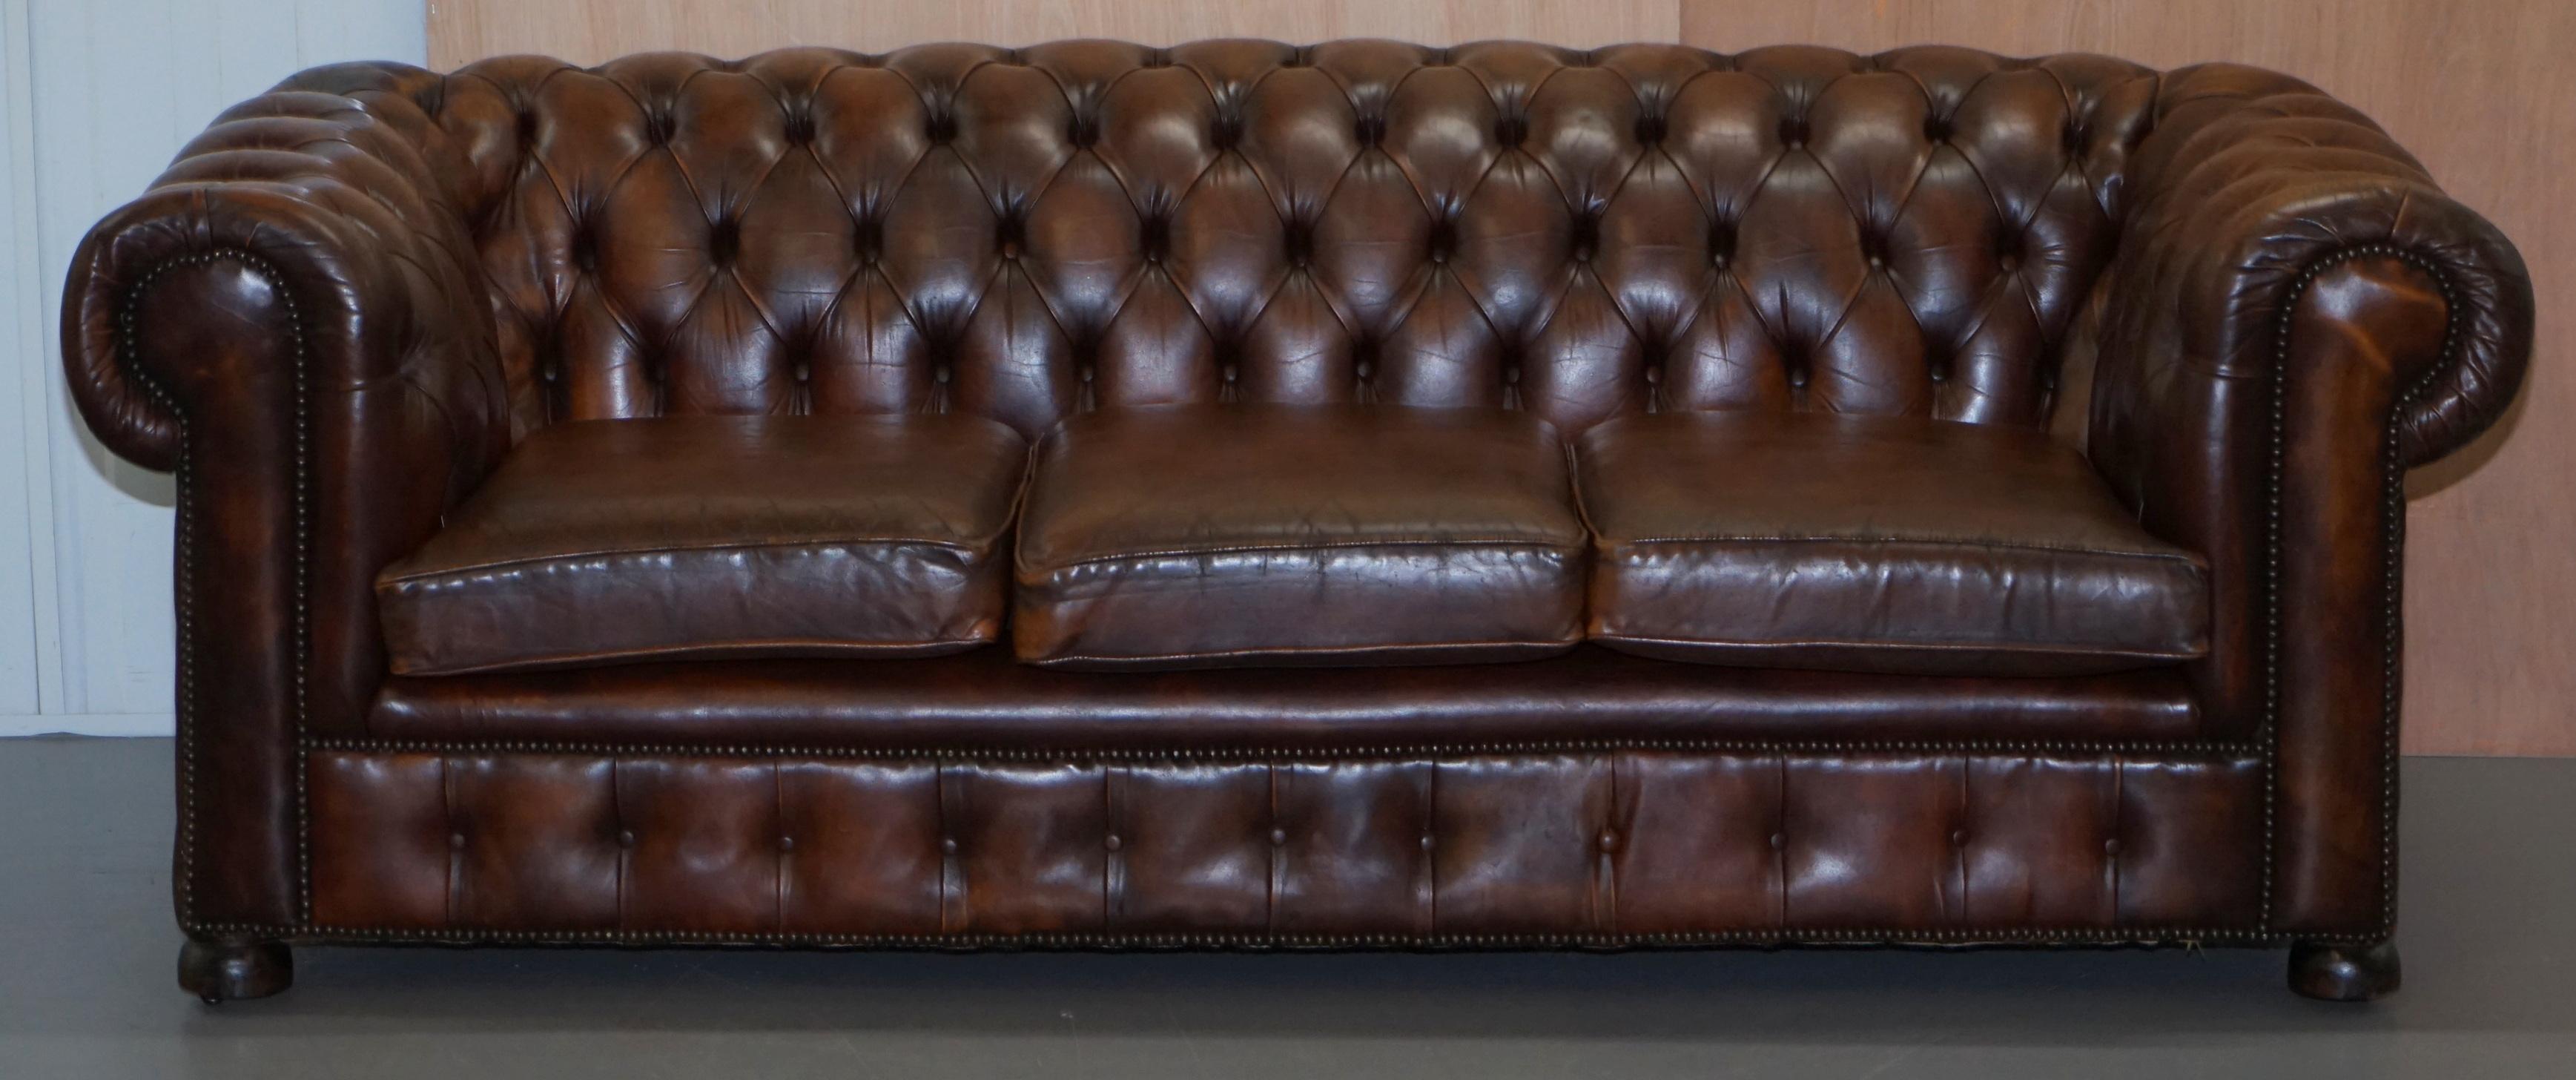 We are delighted to offer for sale this lovely vintage Art Deco circa 1920s aged hand dyed brown leather sofa with coil sprung base

I have the matching armchair listed under my other items

This is a very good looking well made and comfortable